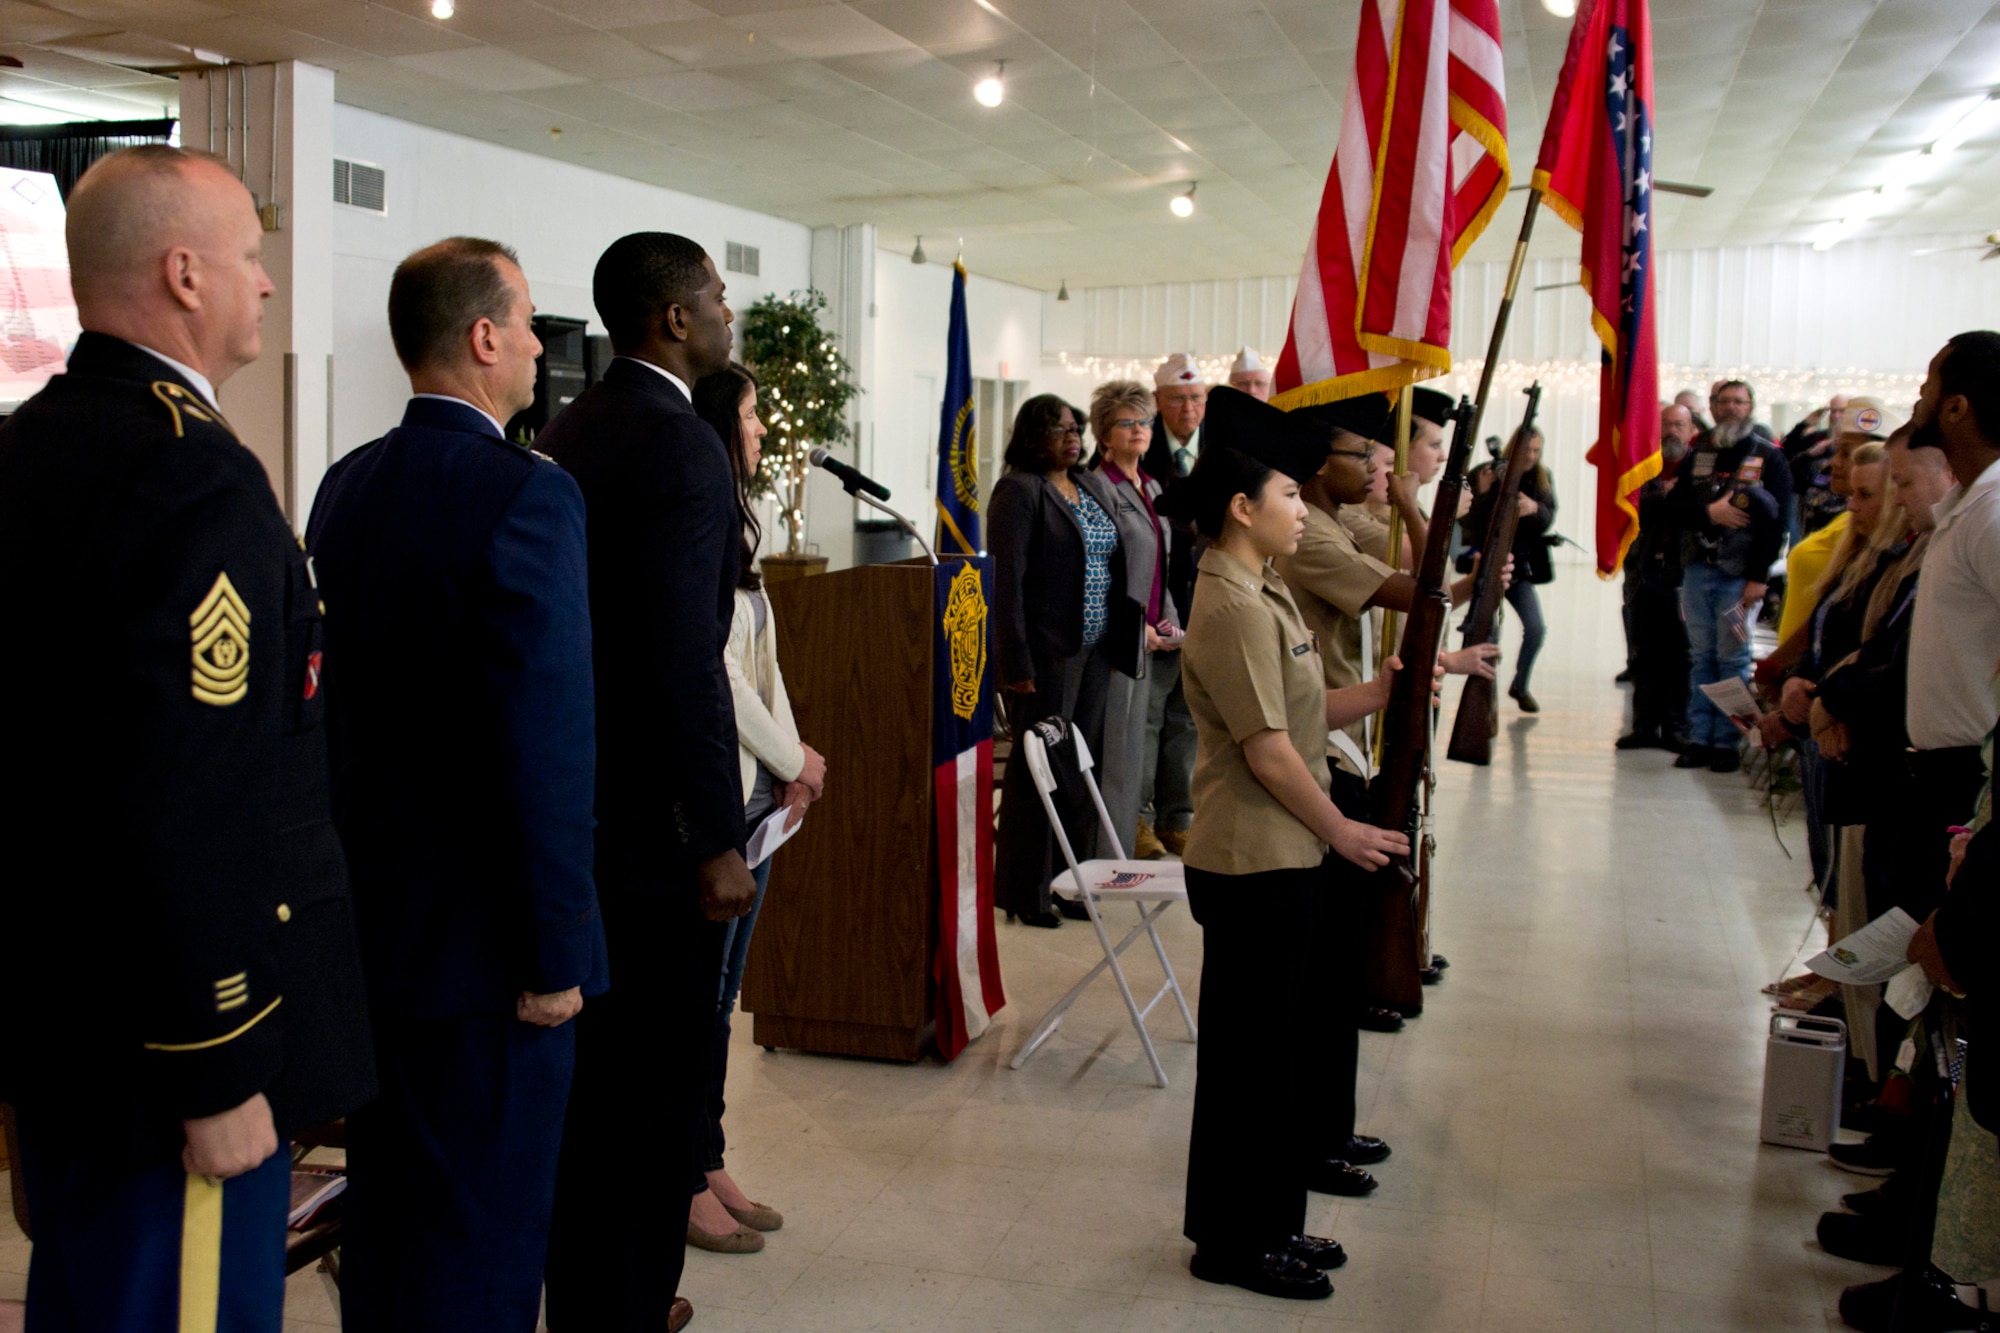 Members of the Parkview High School Navy JROTC post the colors during the 11th Annual Tribute to Fallen Heroes Ceremony in Sherwood, Ark., Apr. 9, 2016.  The annual ceremony, which is sponsored by the Michael Vann Johnson Jr., American Legion Post #74, North Little Rock, Ark., honors the memory of all Arkansans whom have paid the ultimate sacrifice as a result of the war against terrorism. (U.S. Air Force photo by Master Sgt. Jeff Walston/released) 